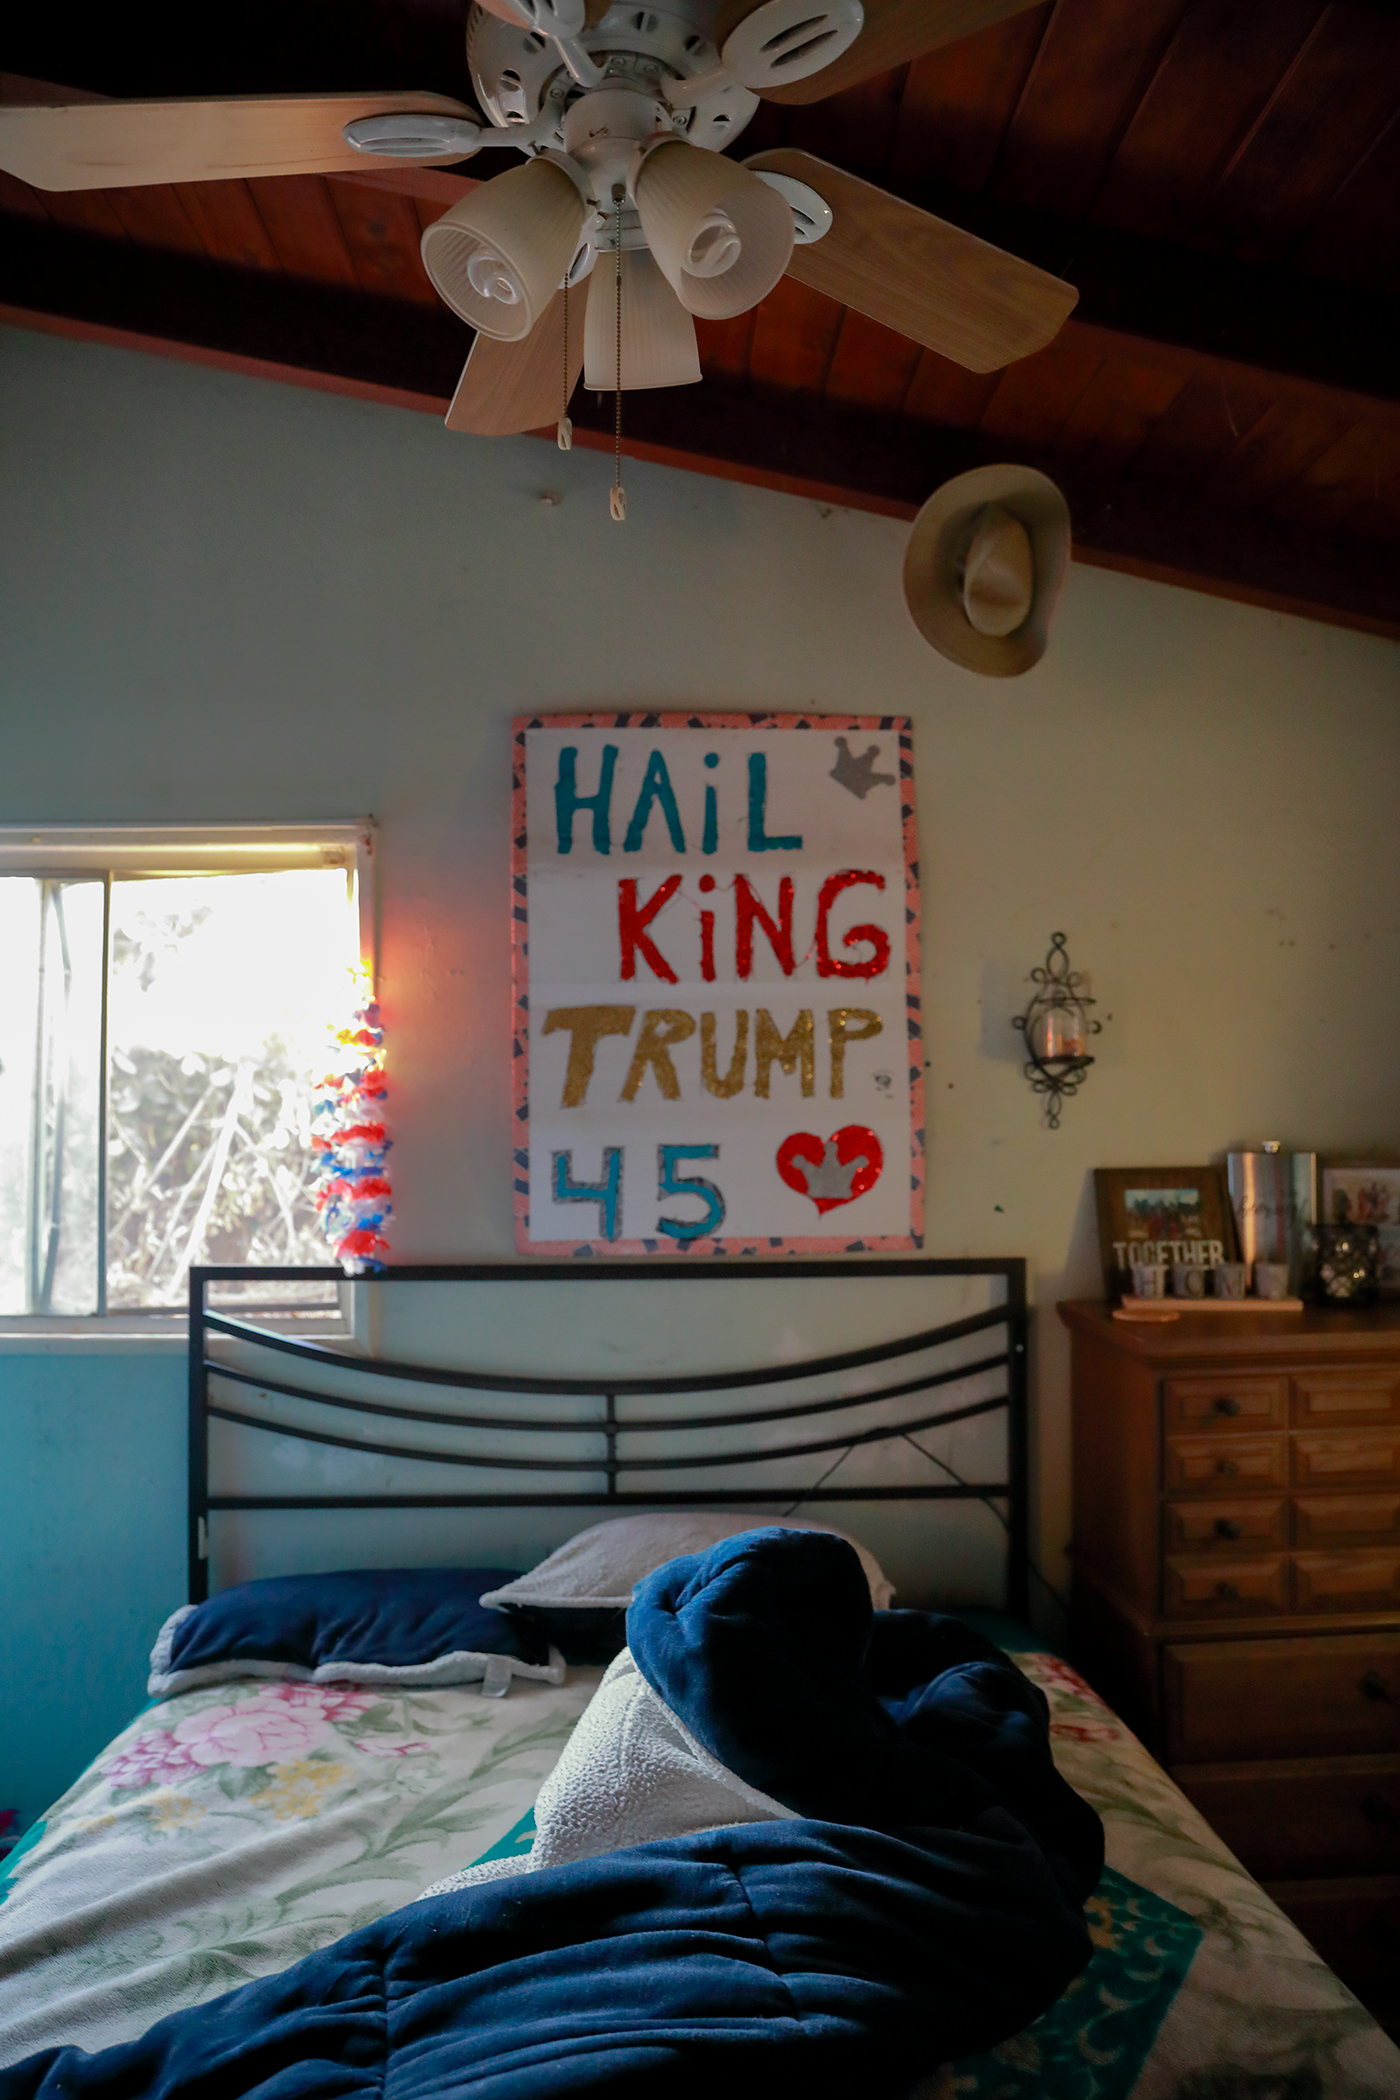 Photograph of bedroom in La Puente, California showing homemade banner above bed, which reads "Hail King Trump, 45"